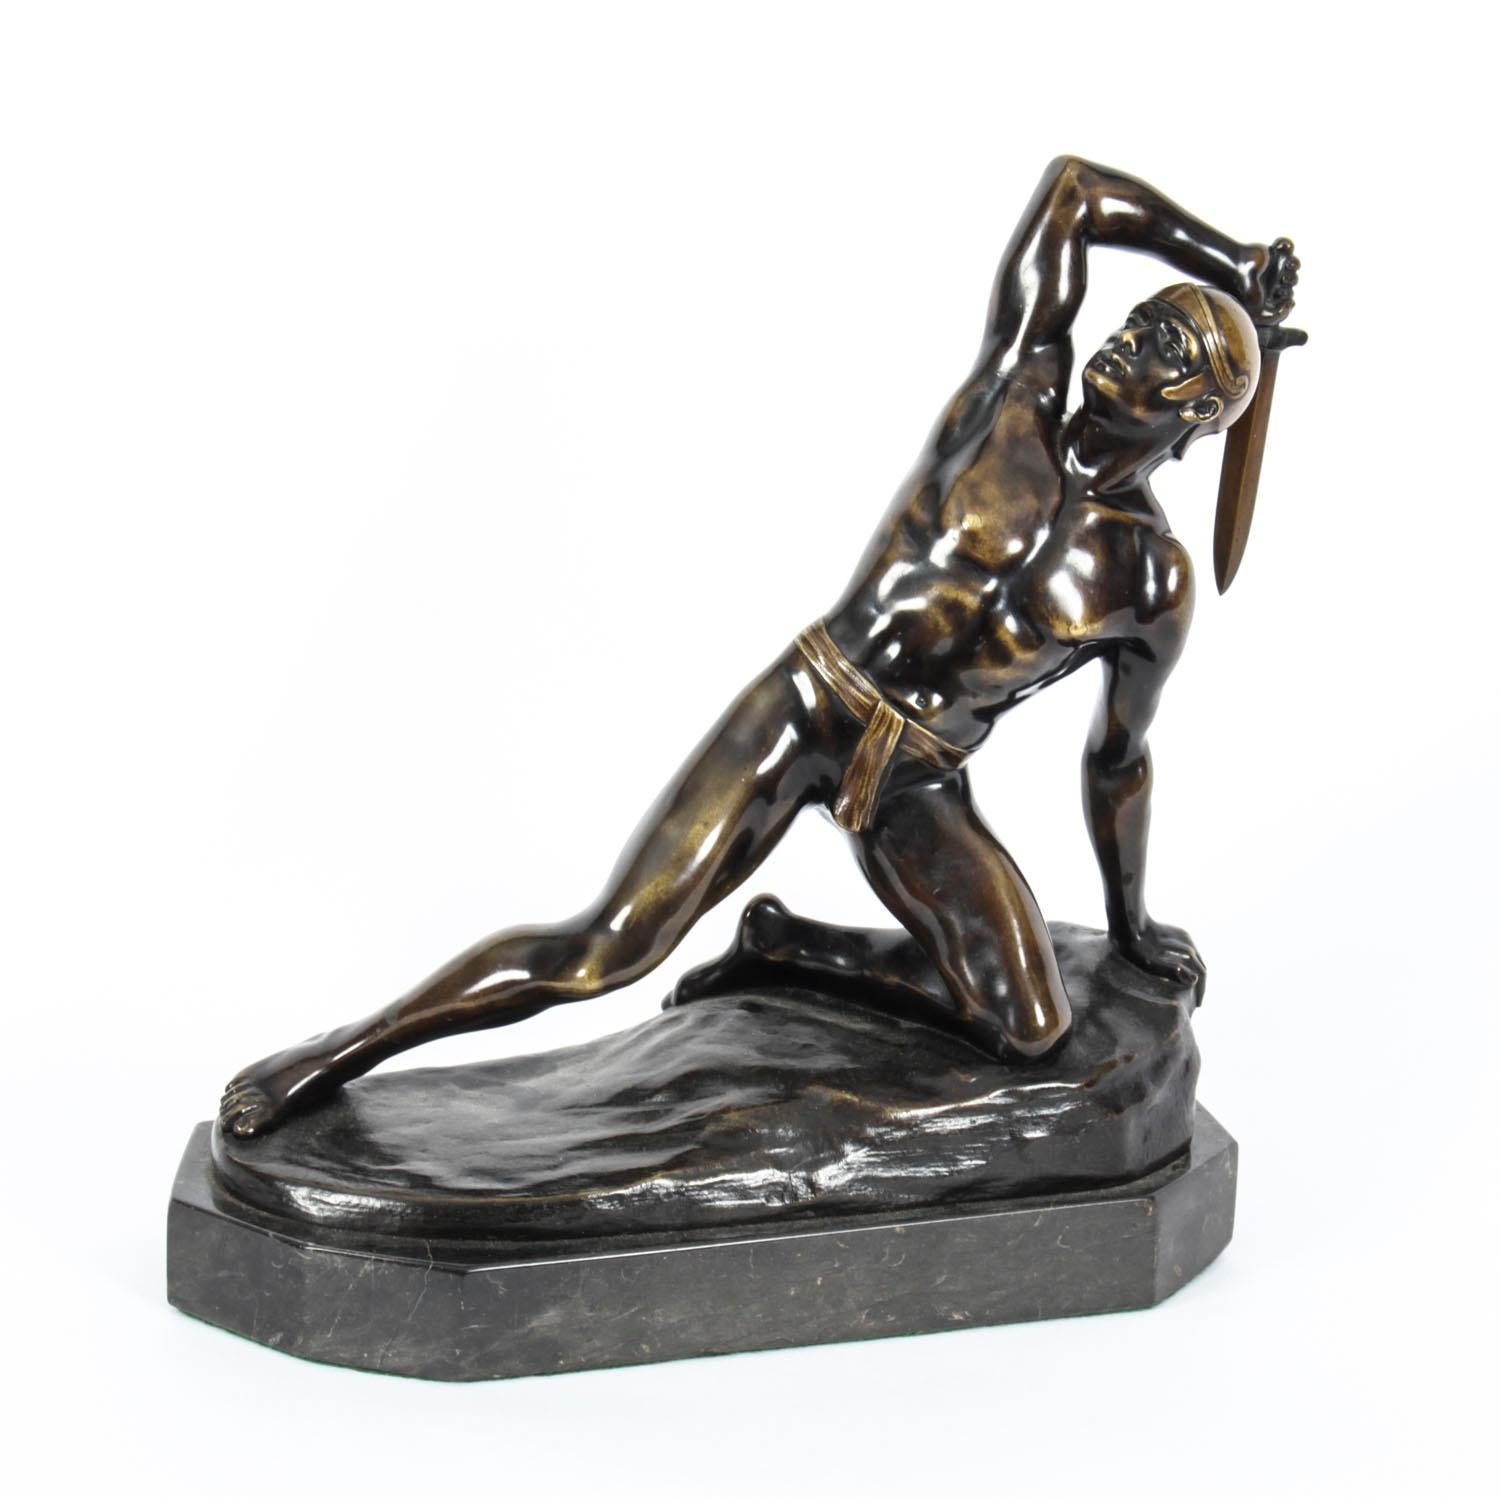 This is a gorgeous Art Deco bronze statue of a Fallen Roman Gladiator by the renowned artist Rudolf Kaesbach (1873-1955), circa 1920 in date. 

He is posed on one knee with his sword in his raised right hand, on a naturalistic mound base and